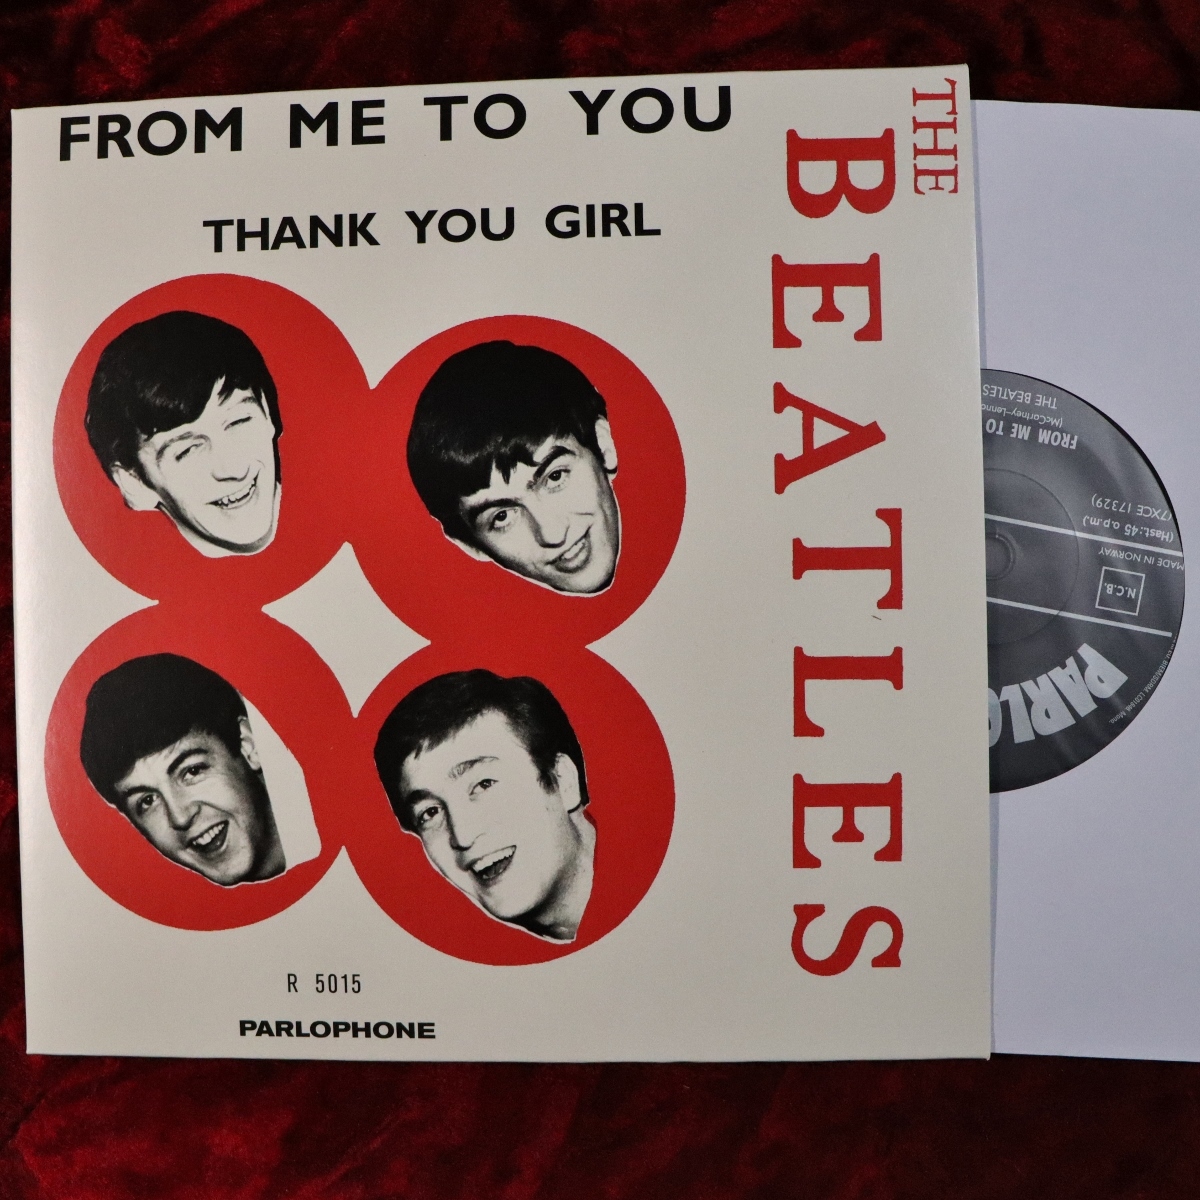 The Beatles/ビートルズ FROM ME TO YOU / THANK YOU GIRL 2019シングルボックス バラ EU盤 (ノルウェー盤スリーブアート) 21C26003